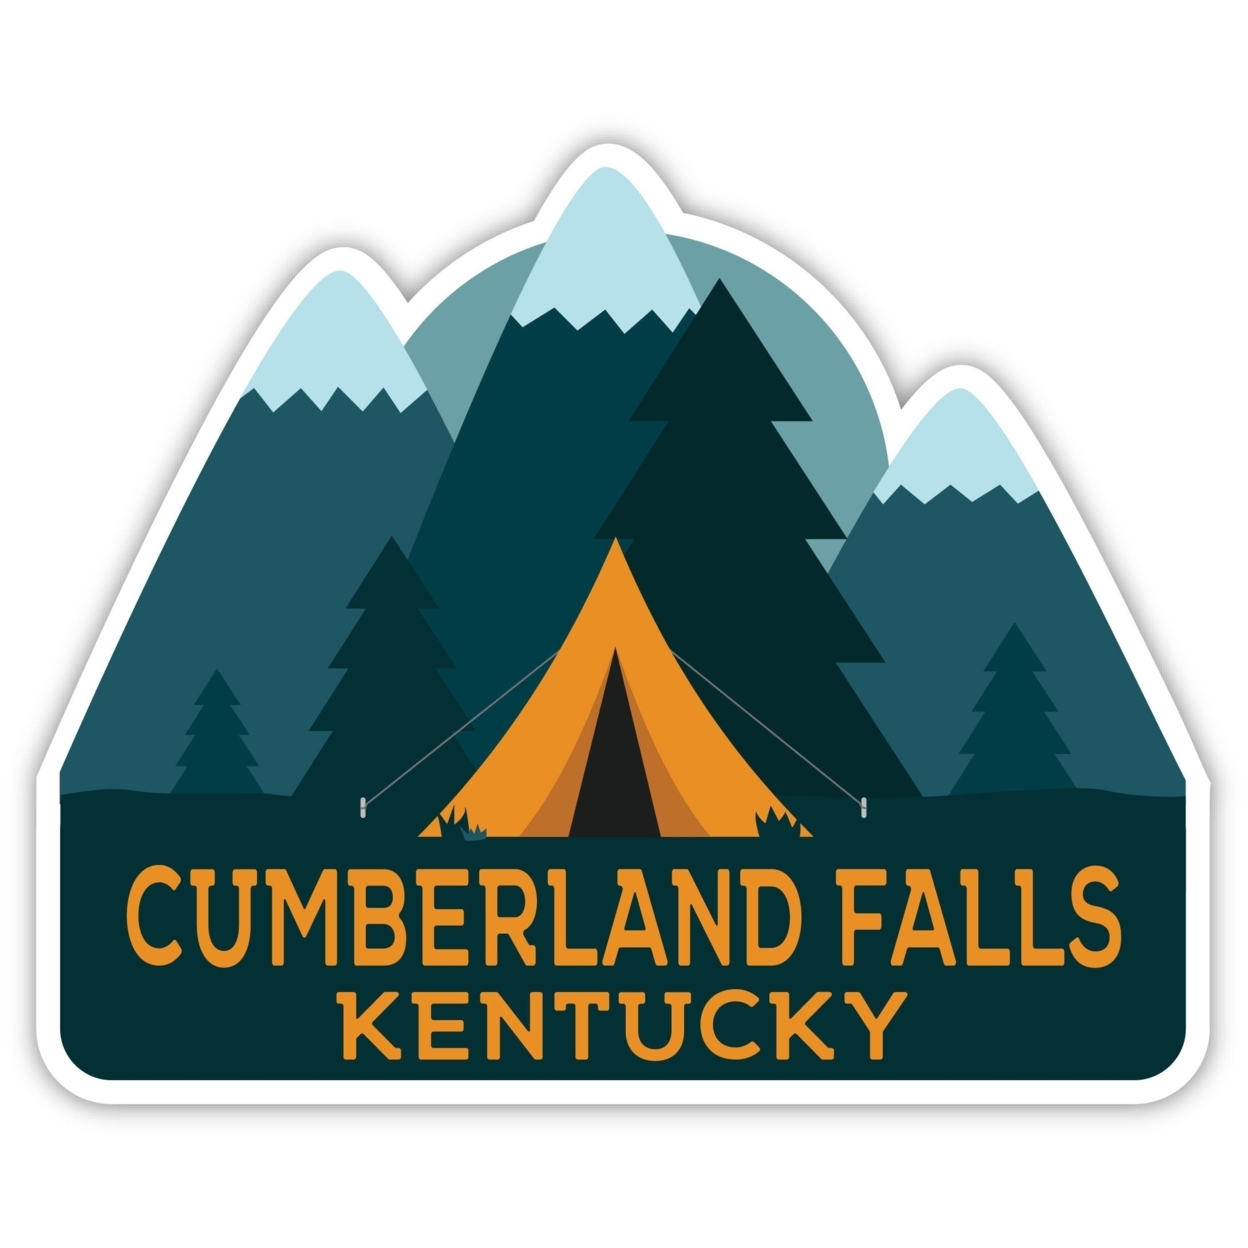 Cumberland Falls Kentucky Souvenir Decorative Stickers (Choose Theme And Size) - 4-Pack, 6-Inch, Tent